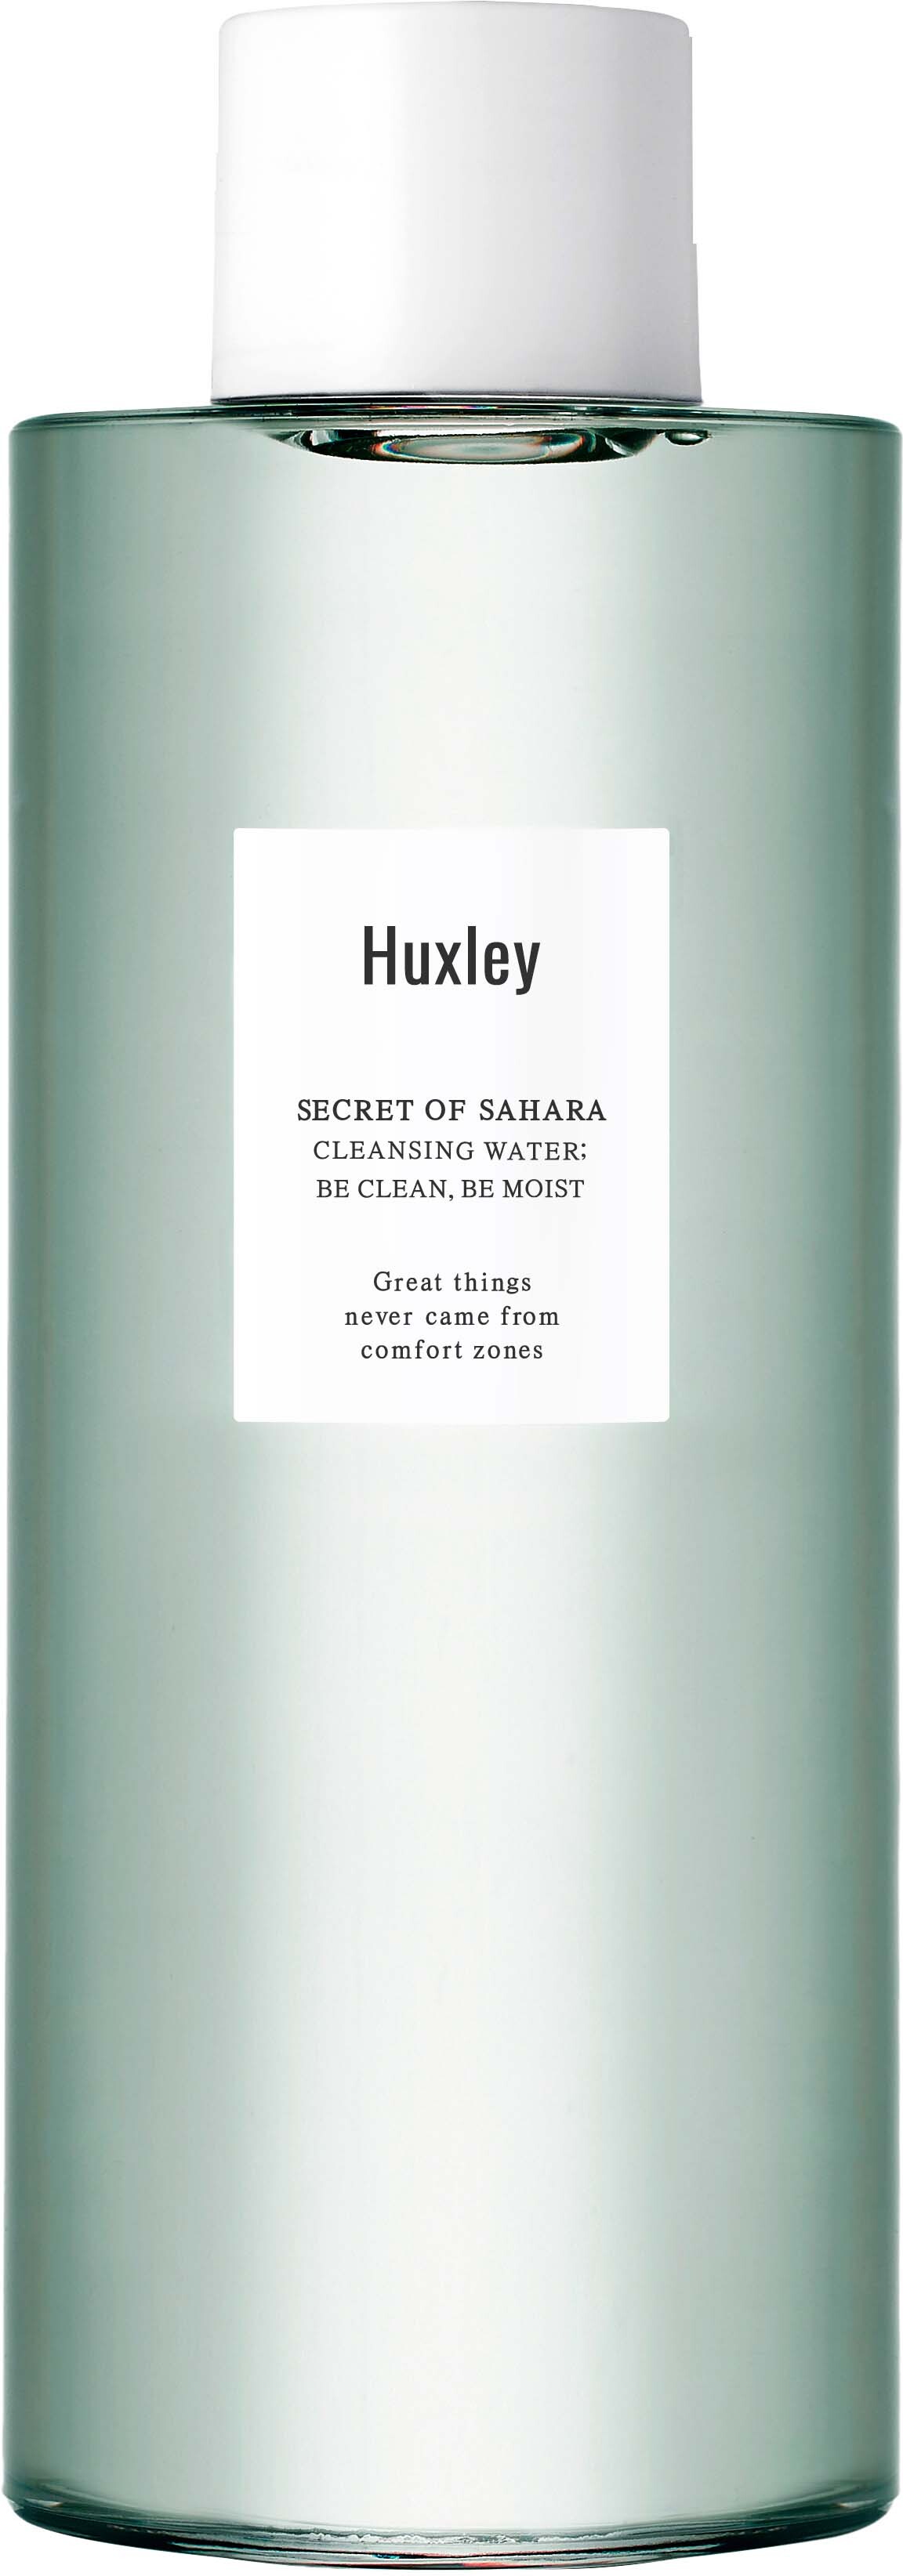 Huxley Cleansing Water; Be Clean, Be Moist 300 ml